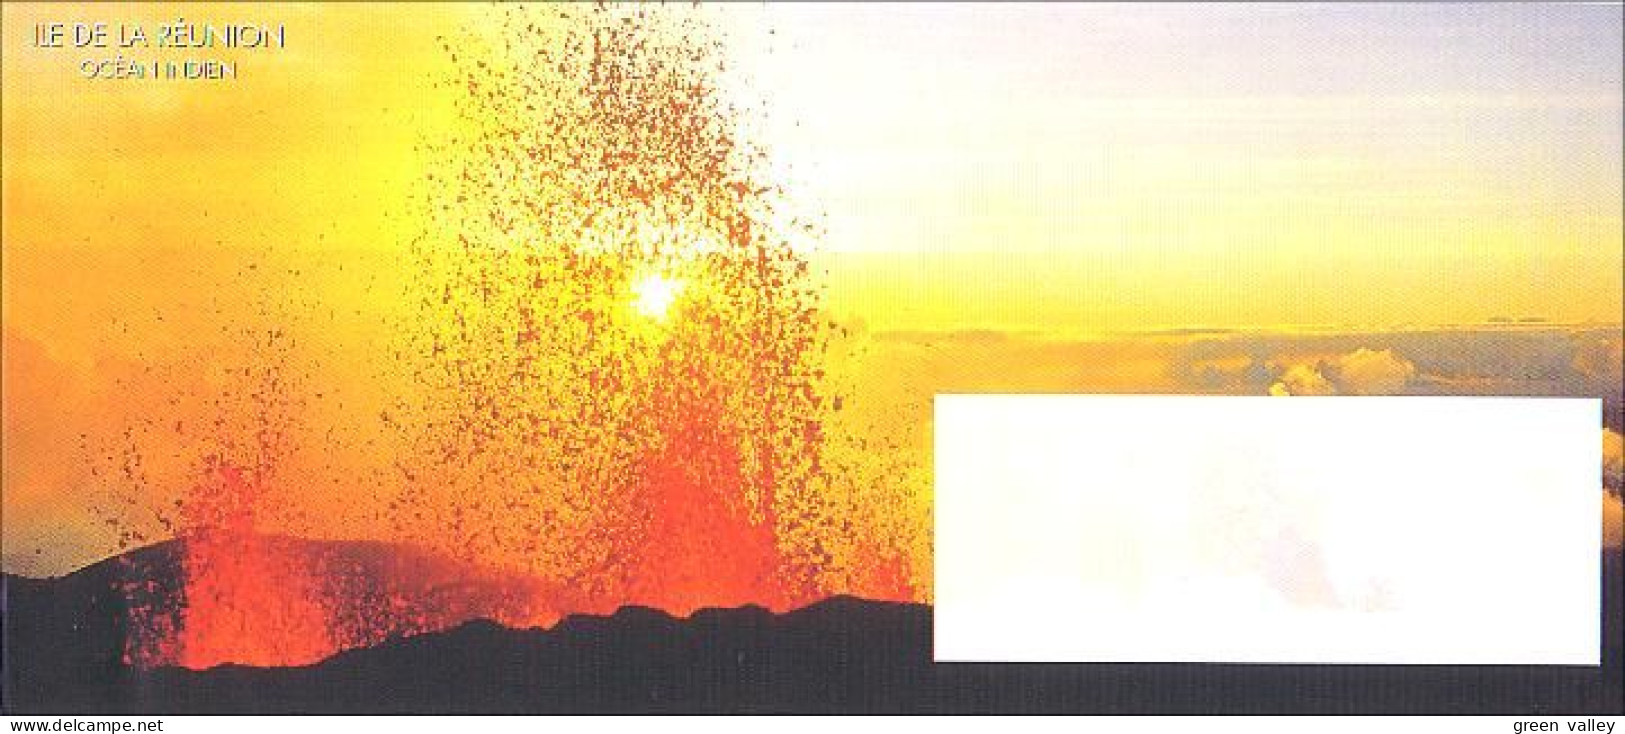 Réunion Enveloppe Illustree Eruption Volcan Volcano Preprinted Cover FDC Cover ( A80 934) - Volcans